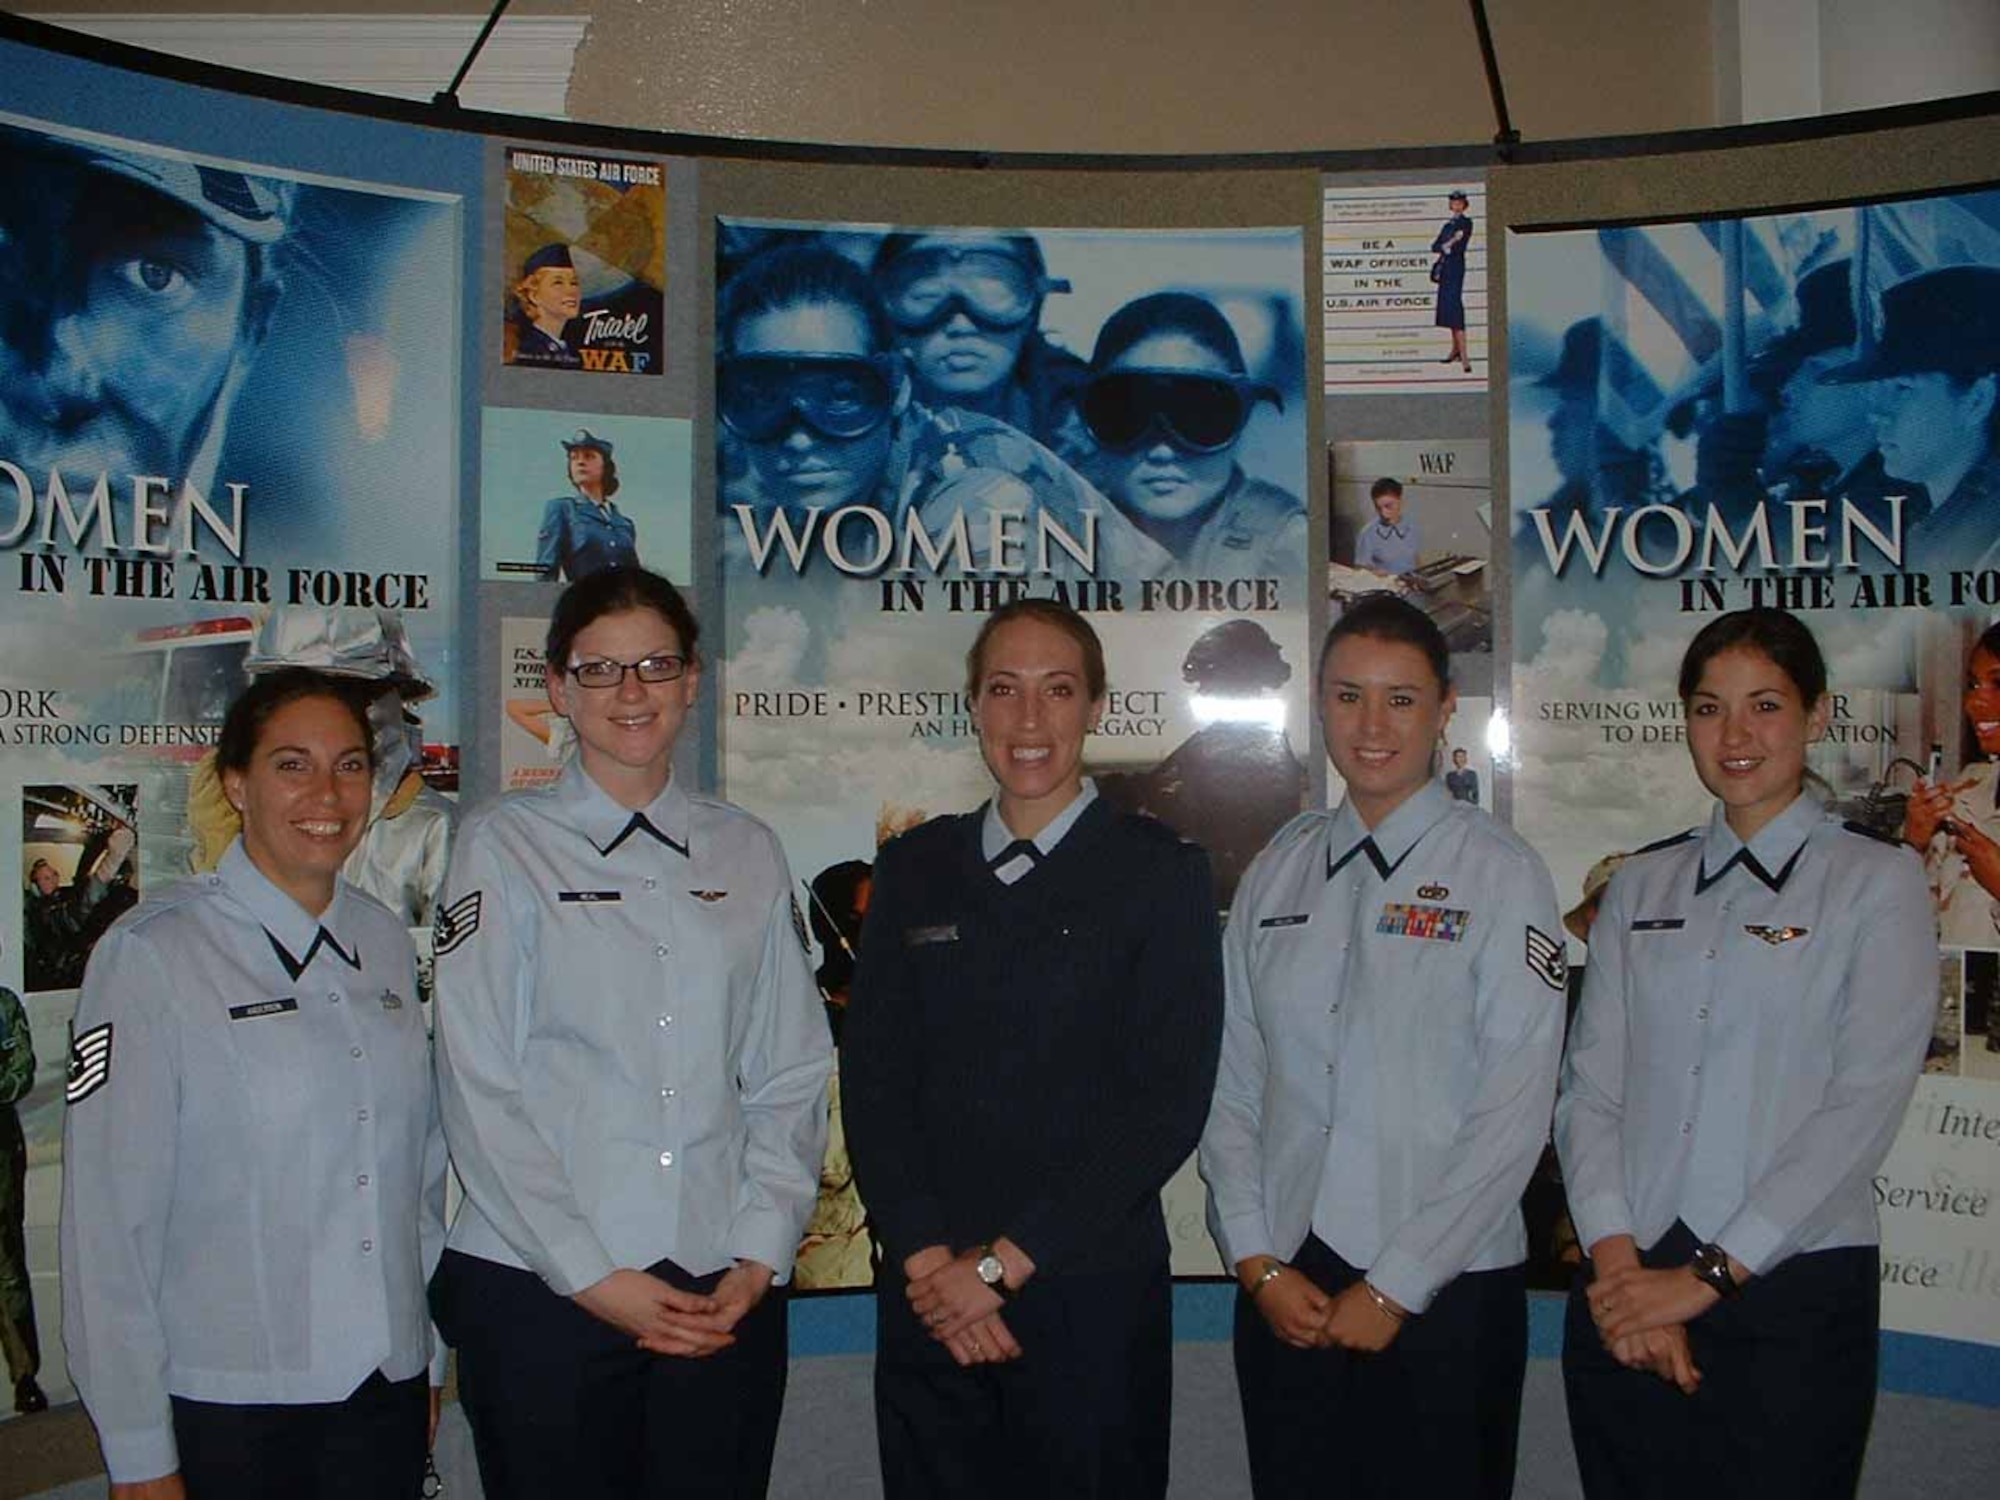 From left, Tech. Sgt. Jennifer Anderson, 552nd Maintenance Squadron; Staff Sgt. Jamie R. Neal, 966th Airborne Air Control Squadron; 1st Lt. Kristen Hobbs, 752nd Communications Squadron; Staff Sgt. Kalonna T. Miller, 552nd Air Control Wing; and 1st Lt. Darci Day, 960th Airborne Air Control Squadron, at the Heritage to Horizons Women's Symposium in Washington, D.C.  (Courtesy photo)